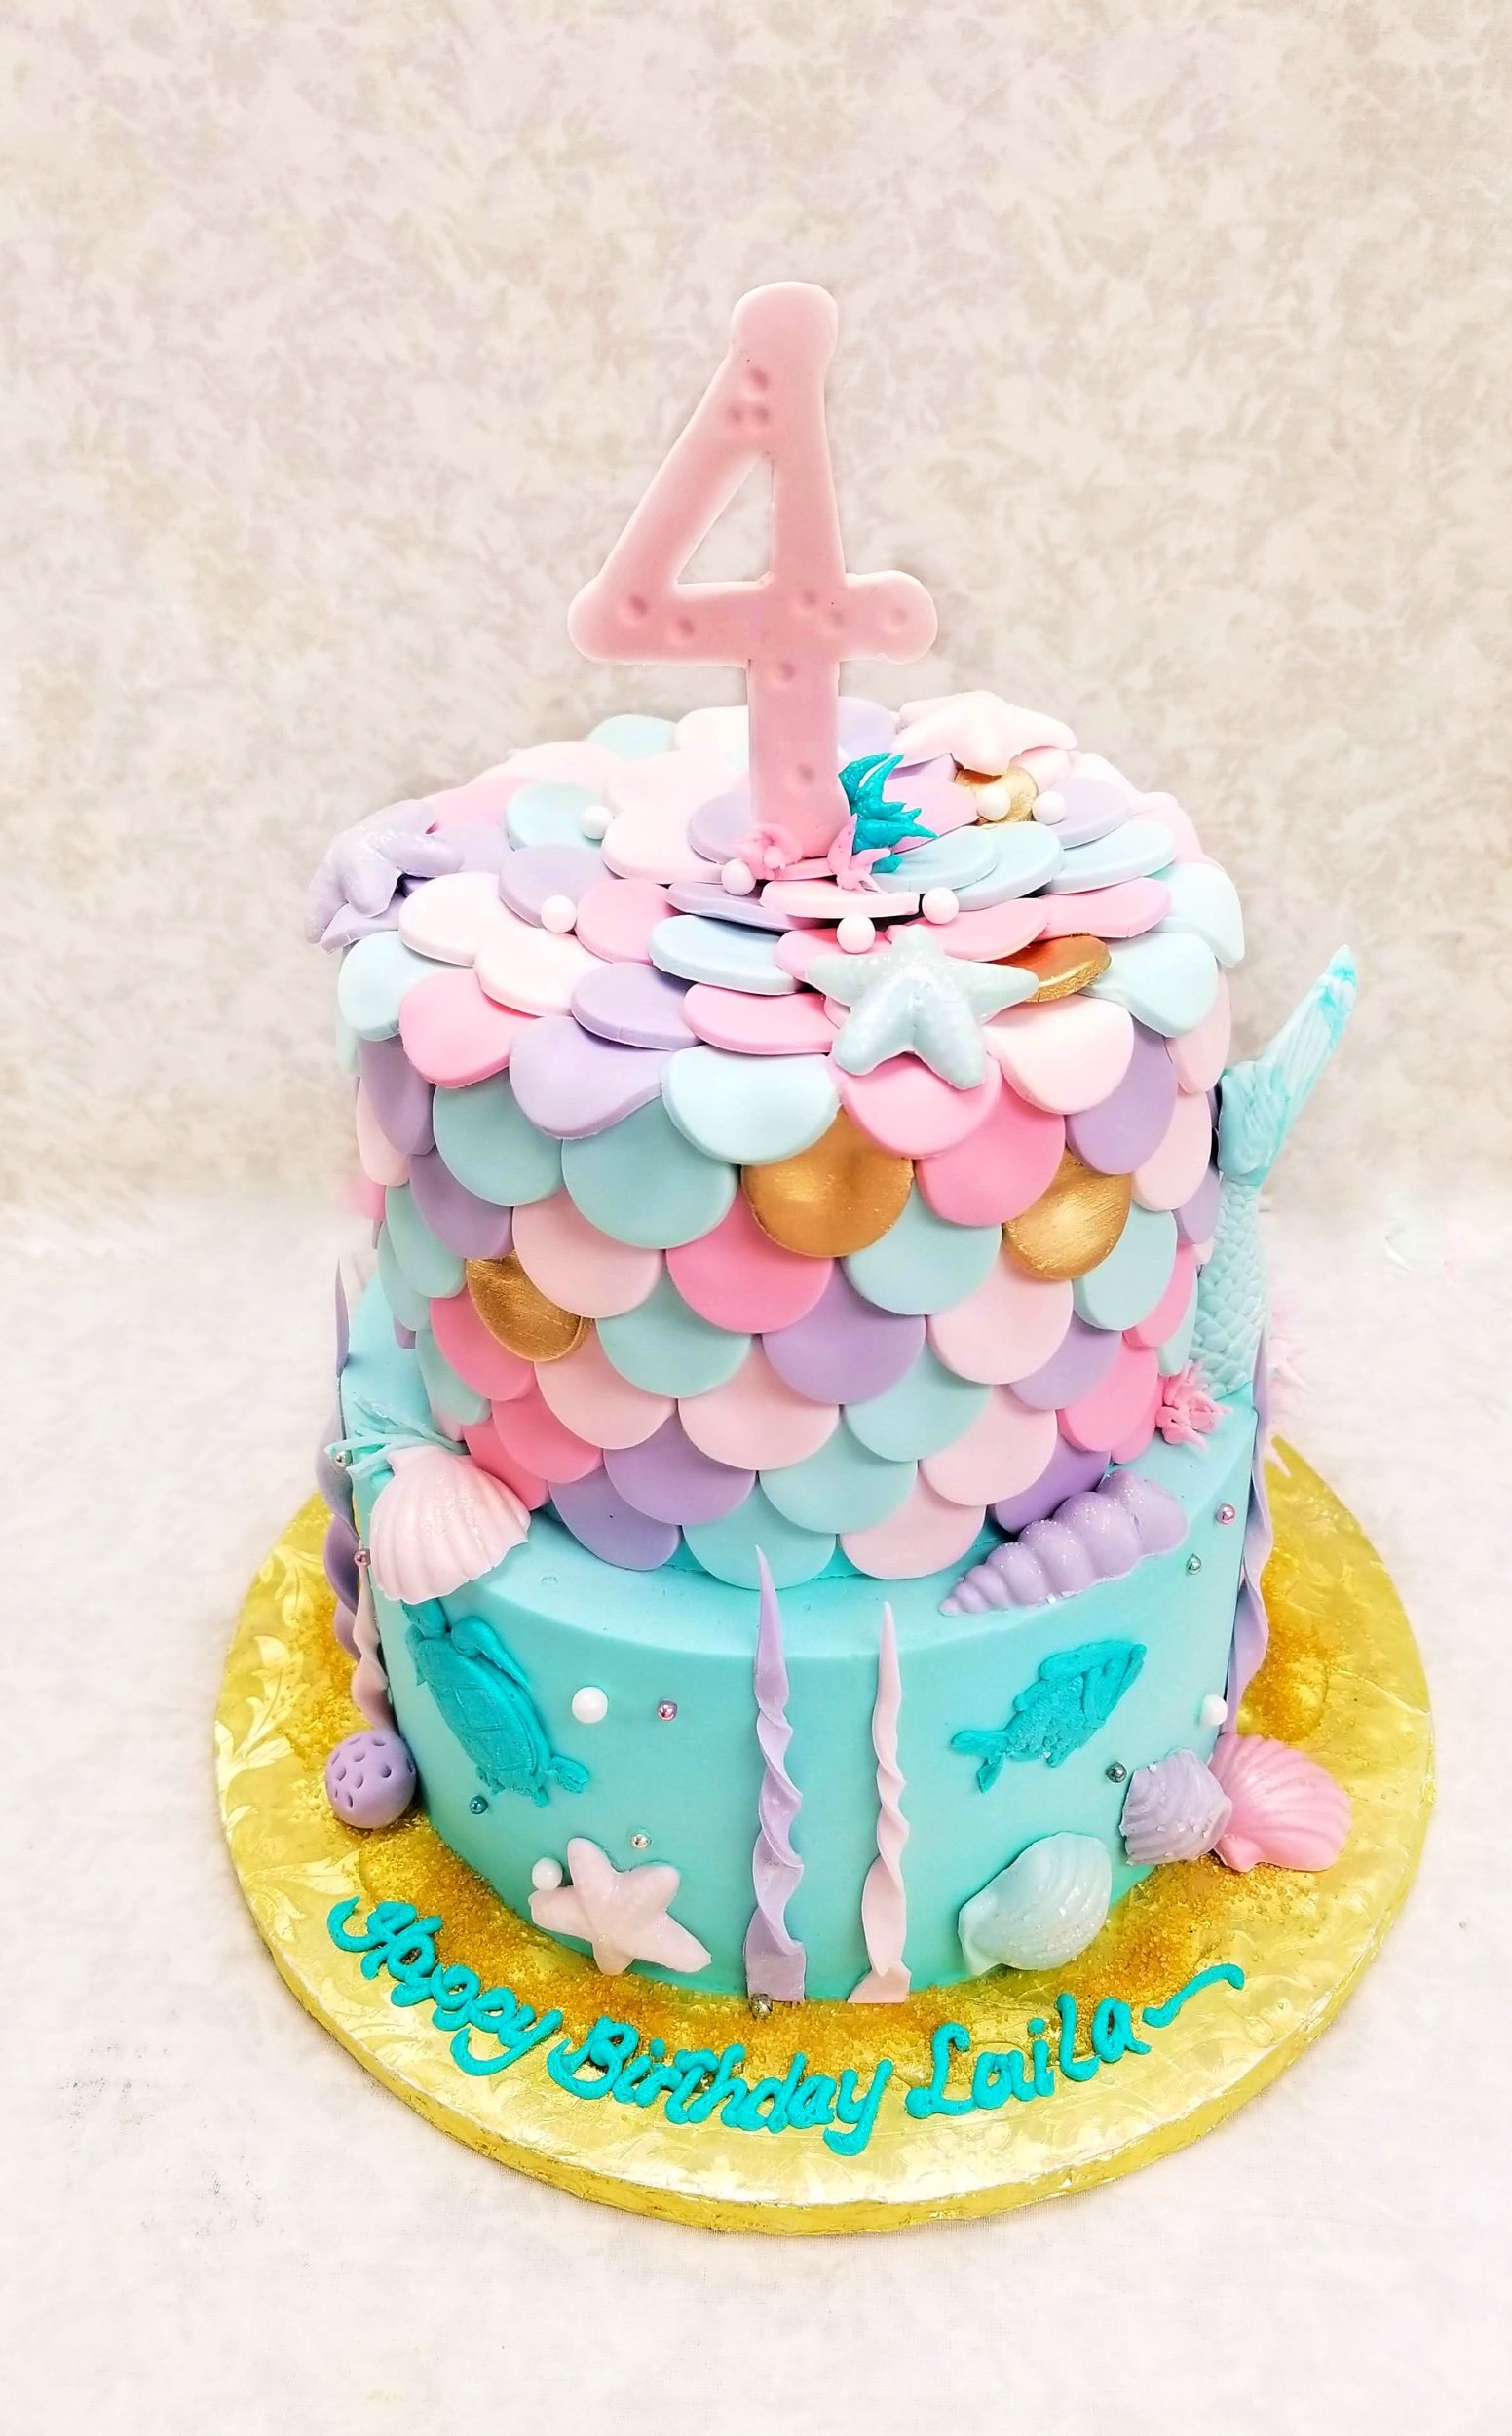 Custom Cakes from Dairy Queen® - Build One Now!